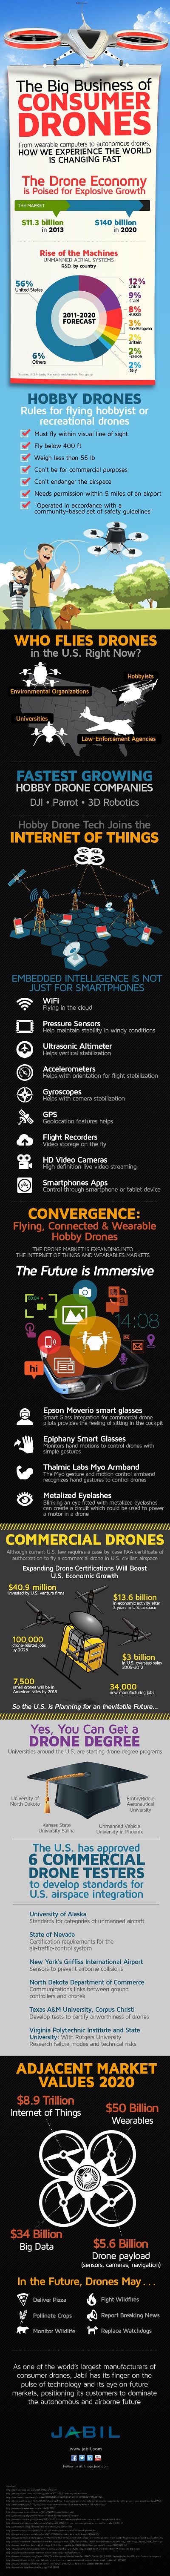 The Big Business of Consumer Drones